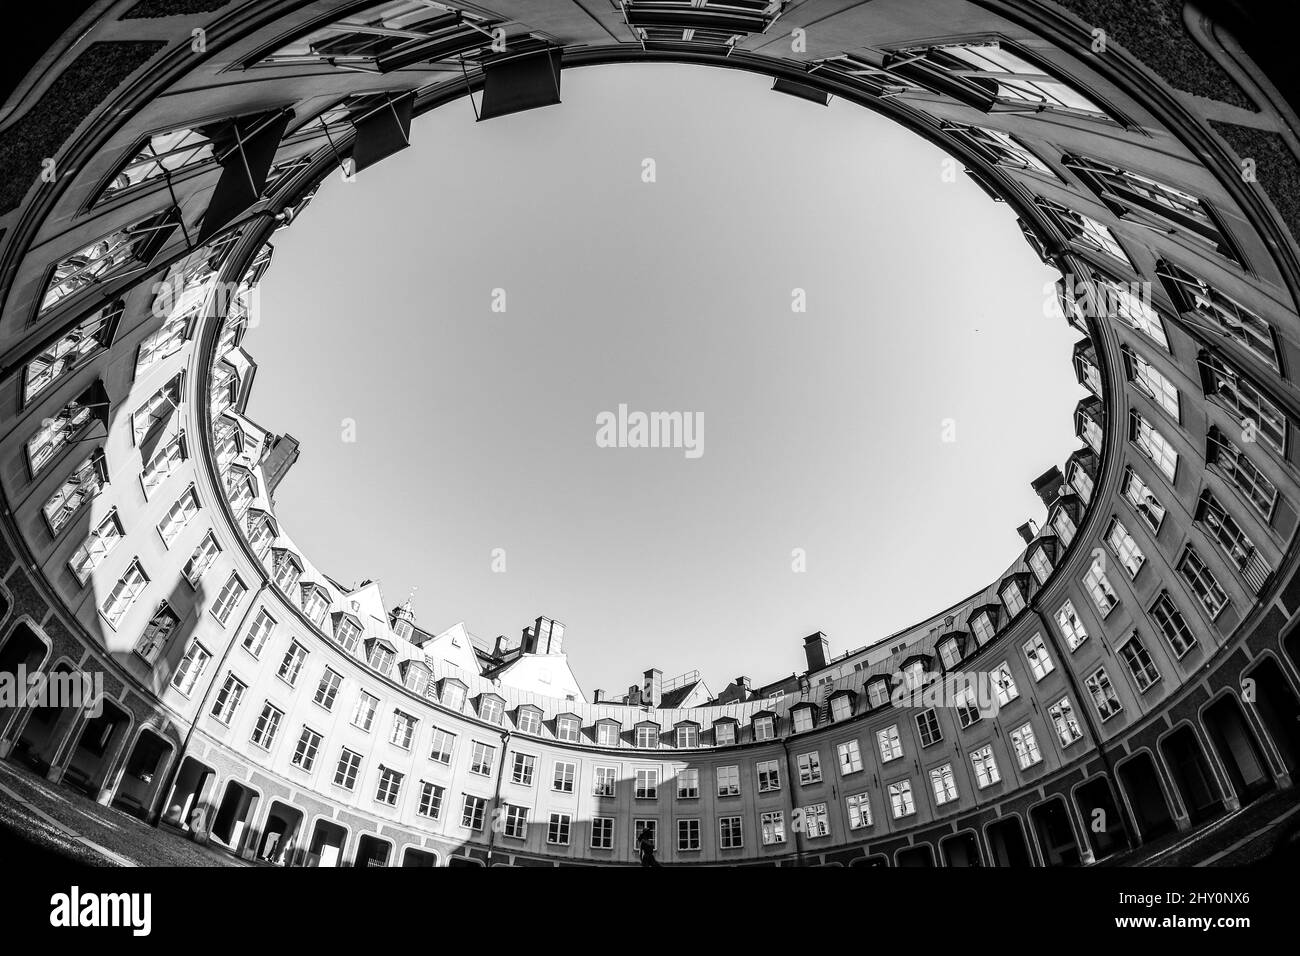 The black and white artistic picture of round square called Brantingtorget in Stockholm in Sweden. Stock Photo